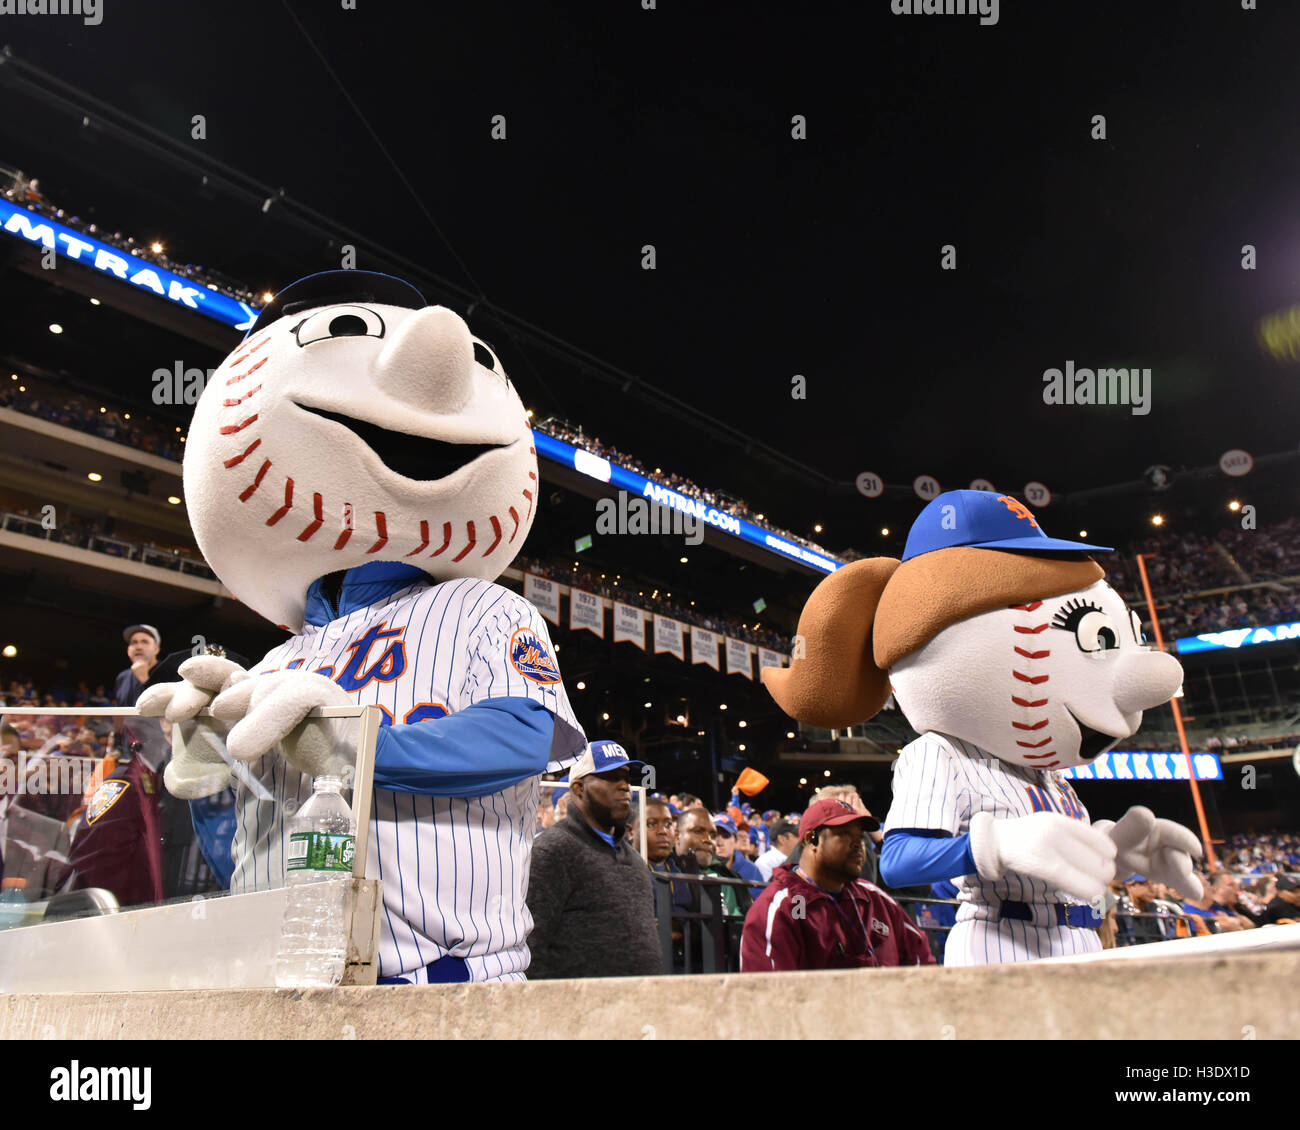 Flushing, New York, USA. 5th Oct, 2016. (L-R) Mr. Met, Mrs. Met (Mets) MLB : Mr. Met and Mrs. Met, the official mascots of the New York Mets, are seen during the National League Wild Card Game against the San Francisco Giants at Citi Field in Flushing, New York, United States . Credit:  Hiroaki Yamaguchi/AFLO/Alamy Live News Stock Photo